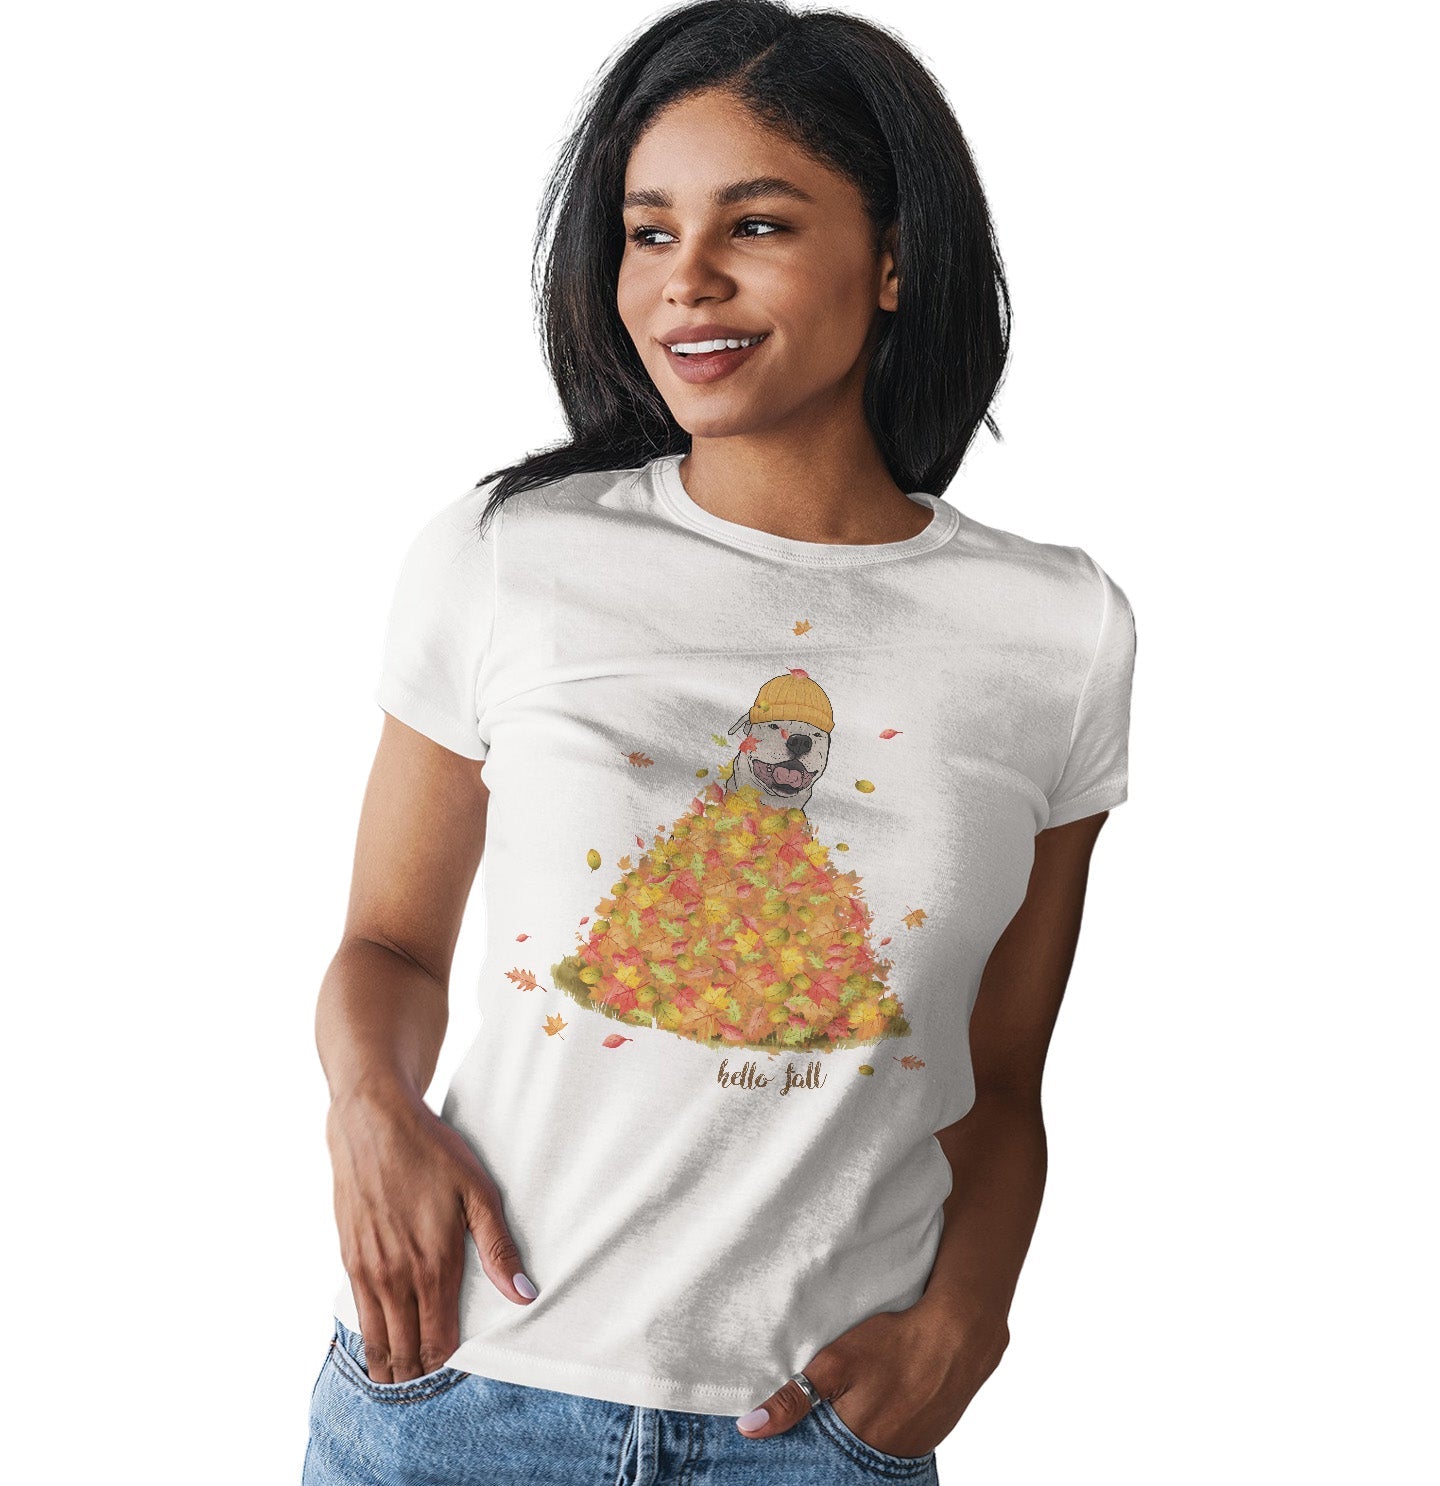 Leaf Pile and Pit Bull - Women's Fitted T-Shirt